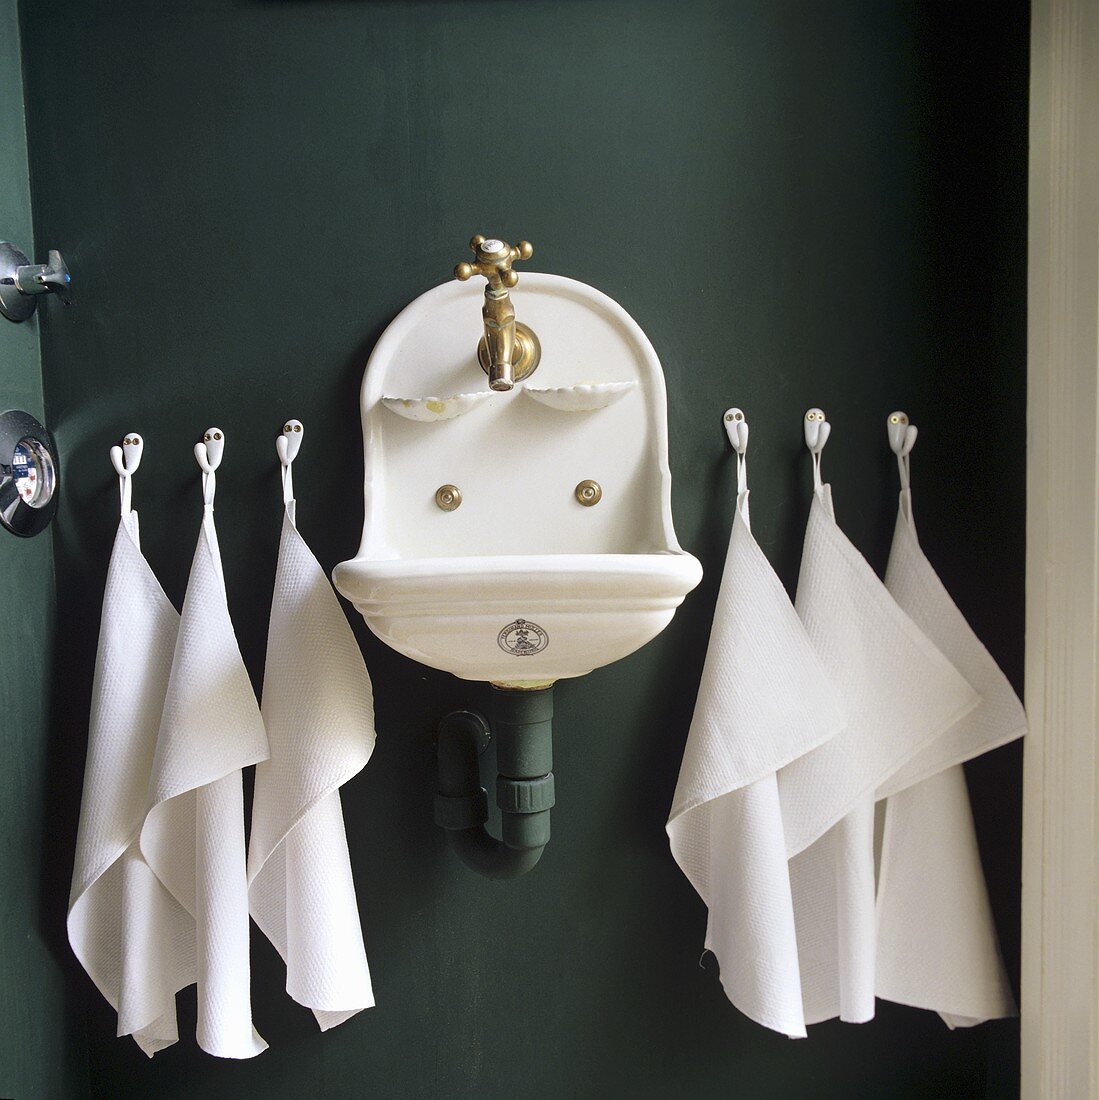 An old sink with white towels hung on the dark grey wall